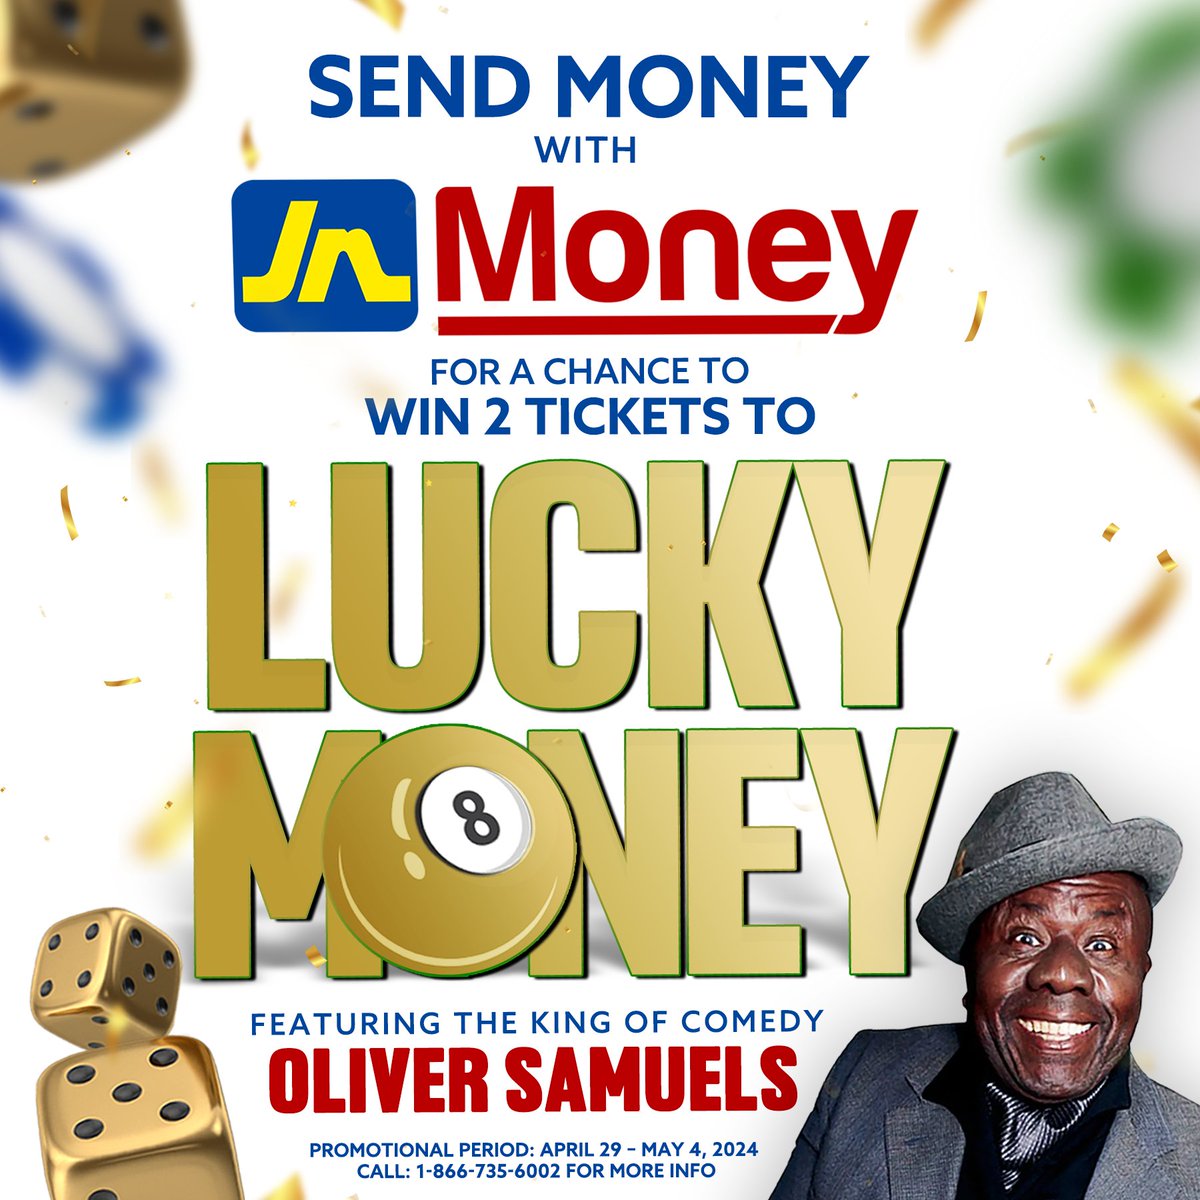 It’s time for another giveaway!🎟️ Win 2 tickets to Lucky Money with Oliver Samuels in Canada. Simply send money transfers using JN Money from April 29 to May 4, 2024, and you could be one of two lucky winners! #JNMoney #LuckyMoney #OliverSamuels